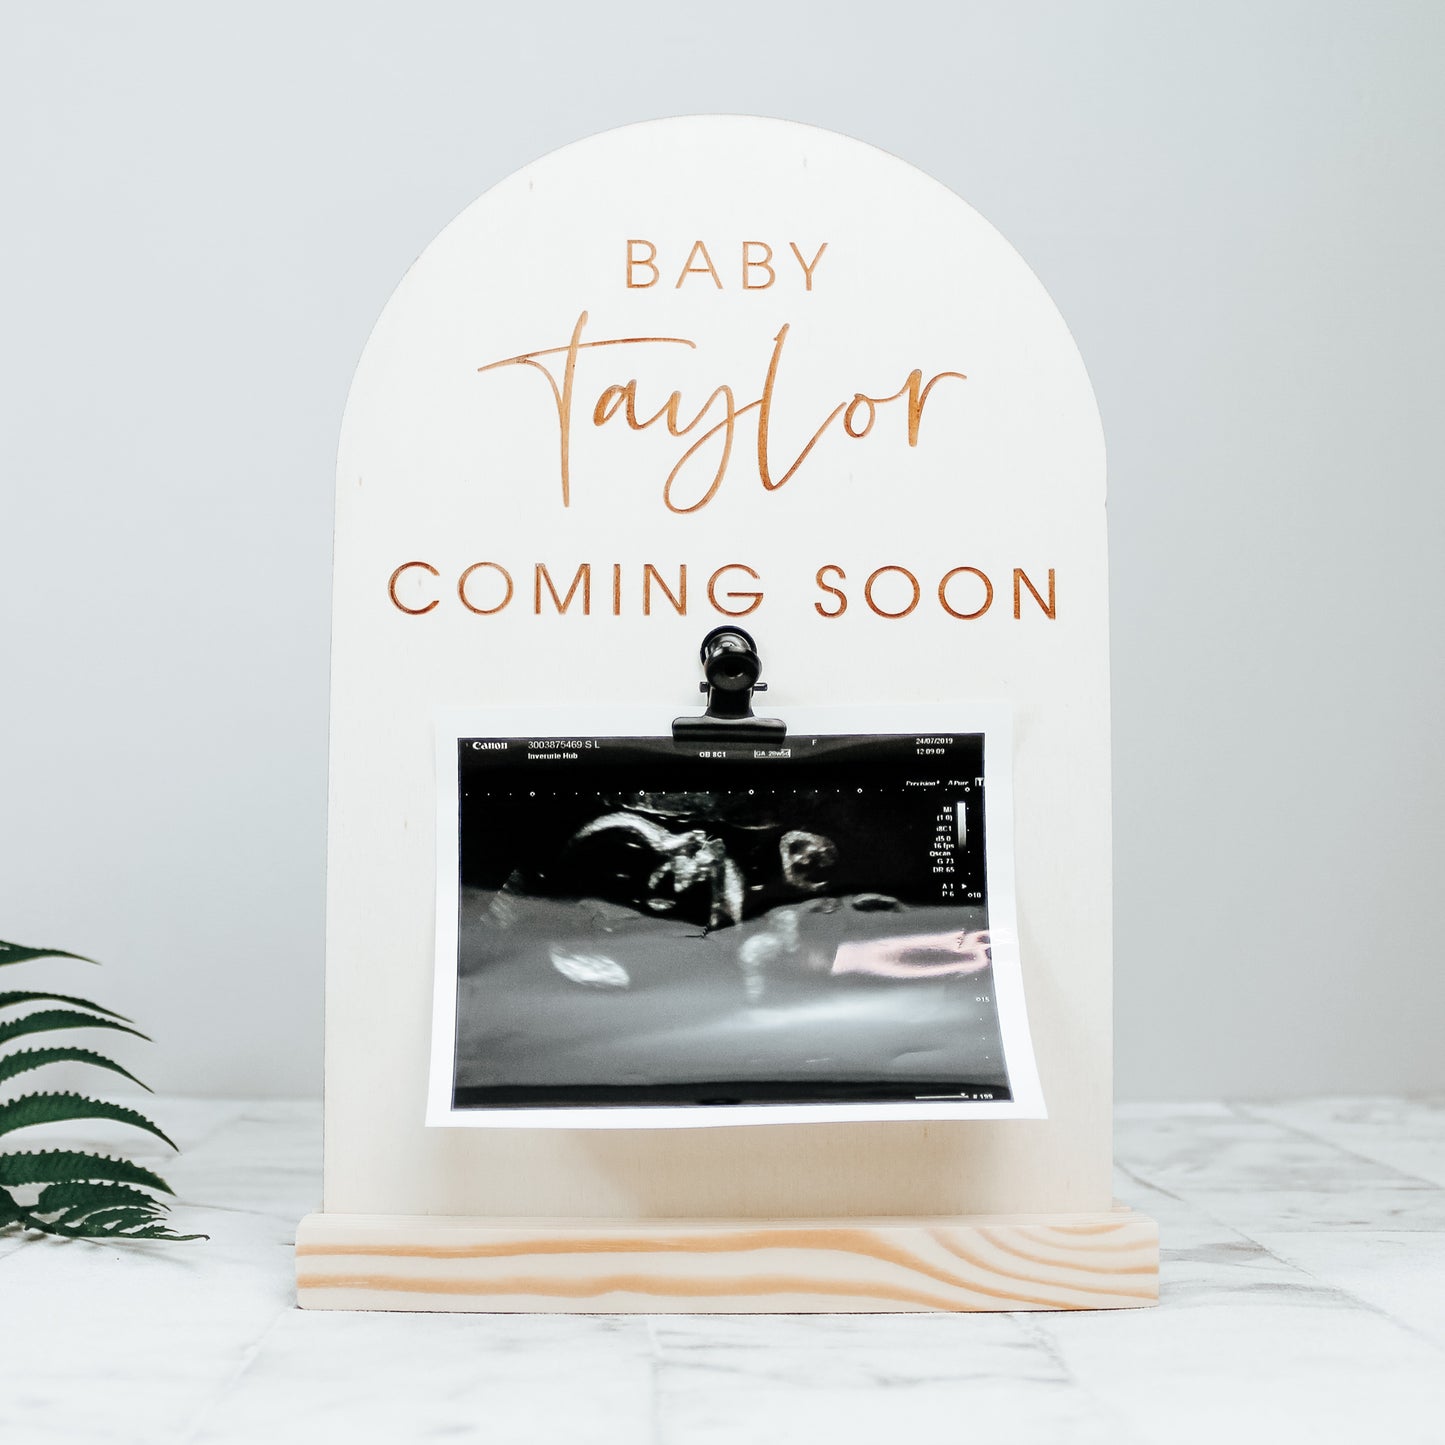 engraved and personalised wooden baby announcement sign - perfect for showing your new addition on social media - natural photo prop